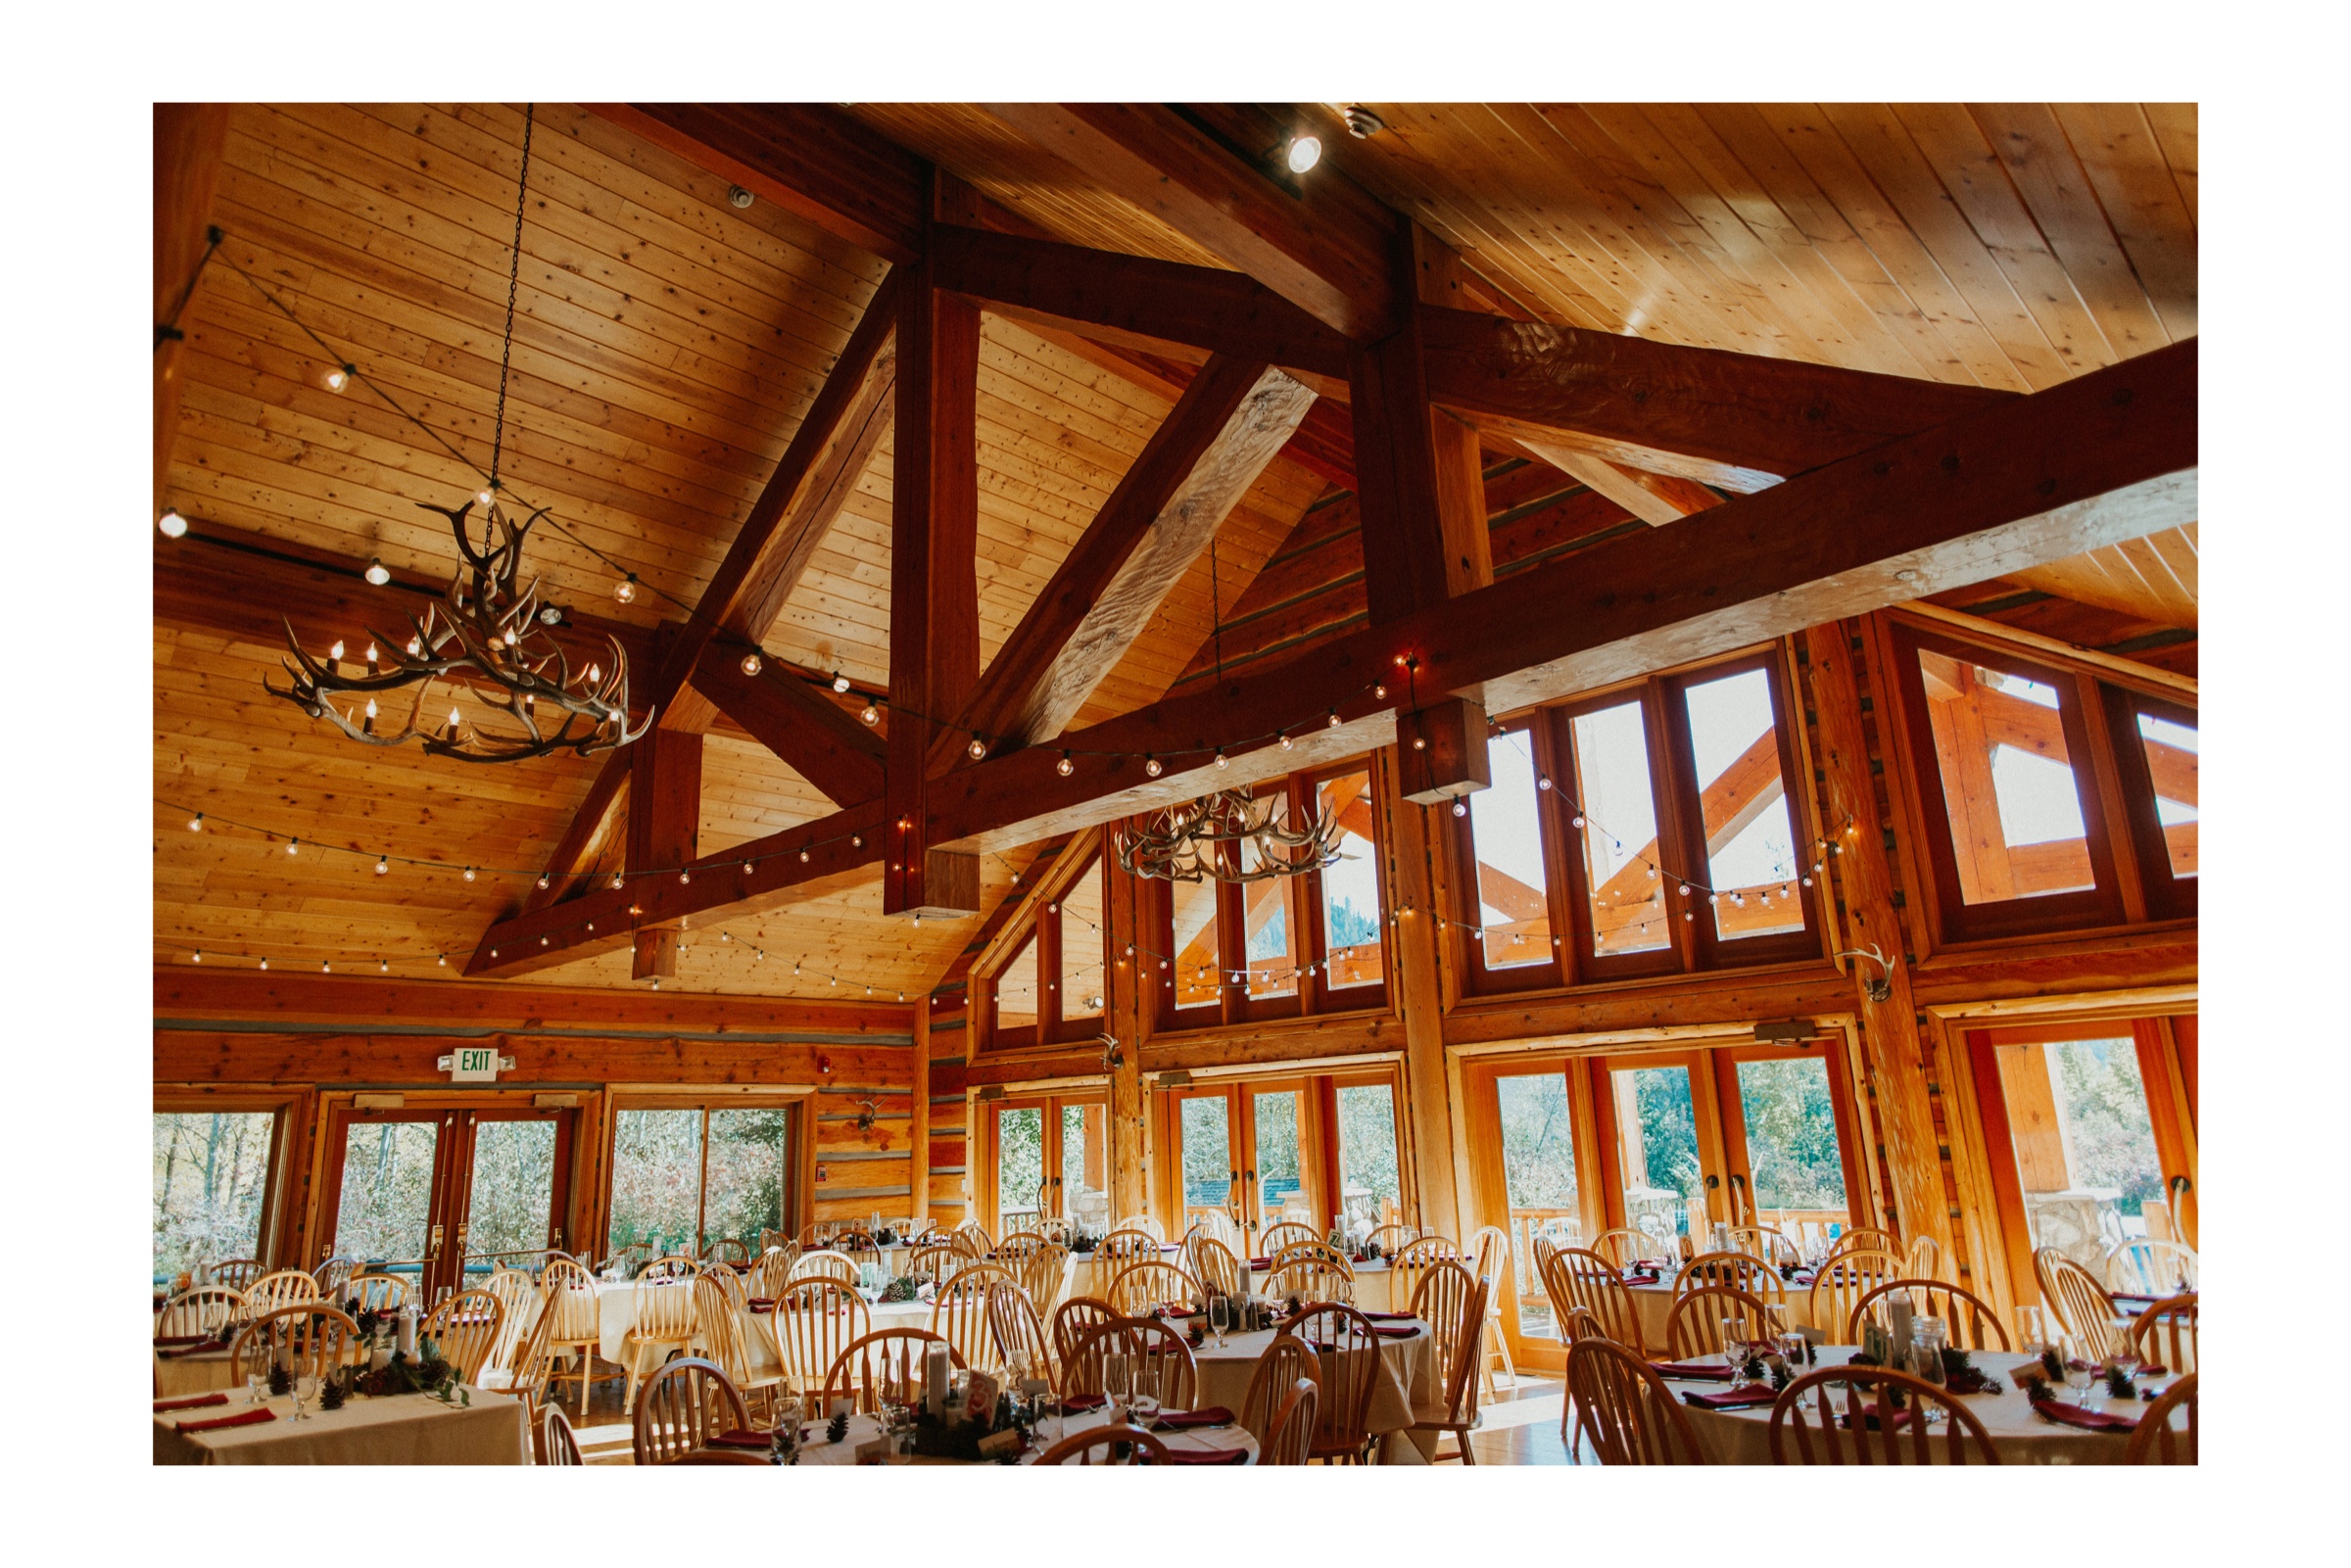 Mountain Springs Lodge Wedding by Sarah Anne Photography